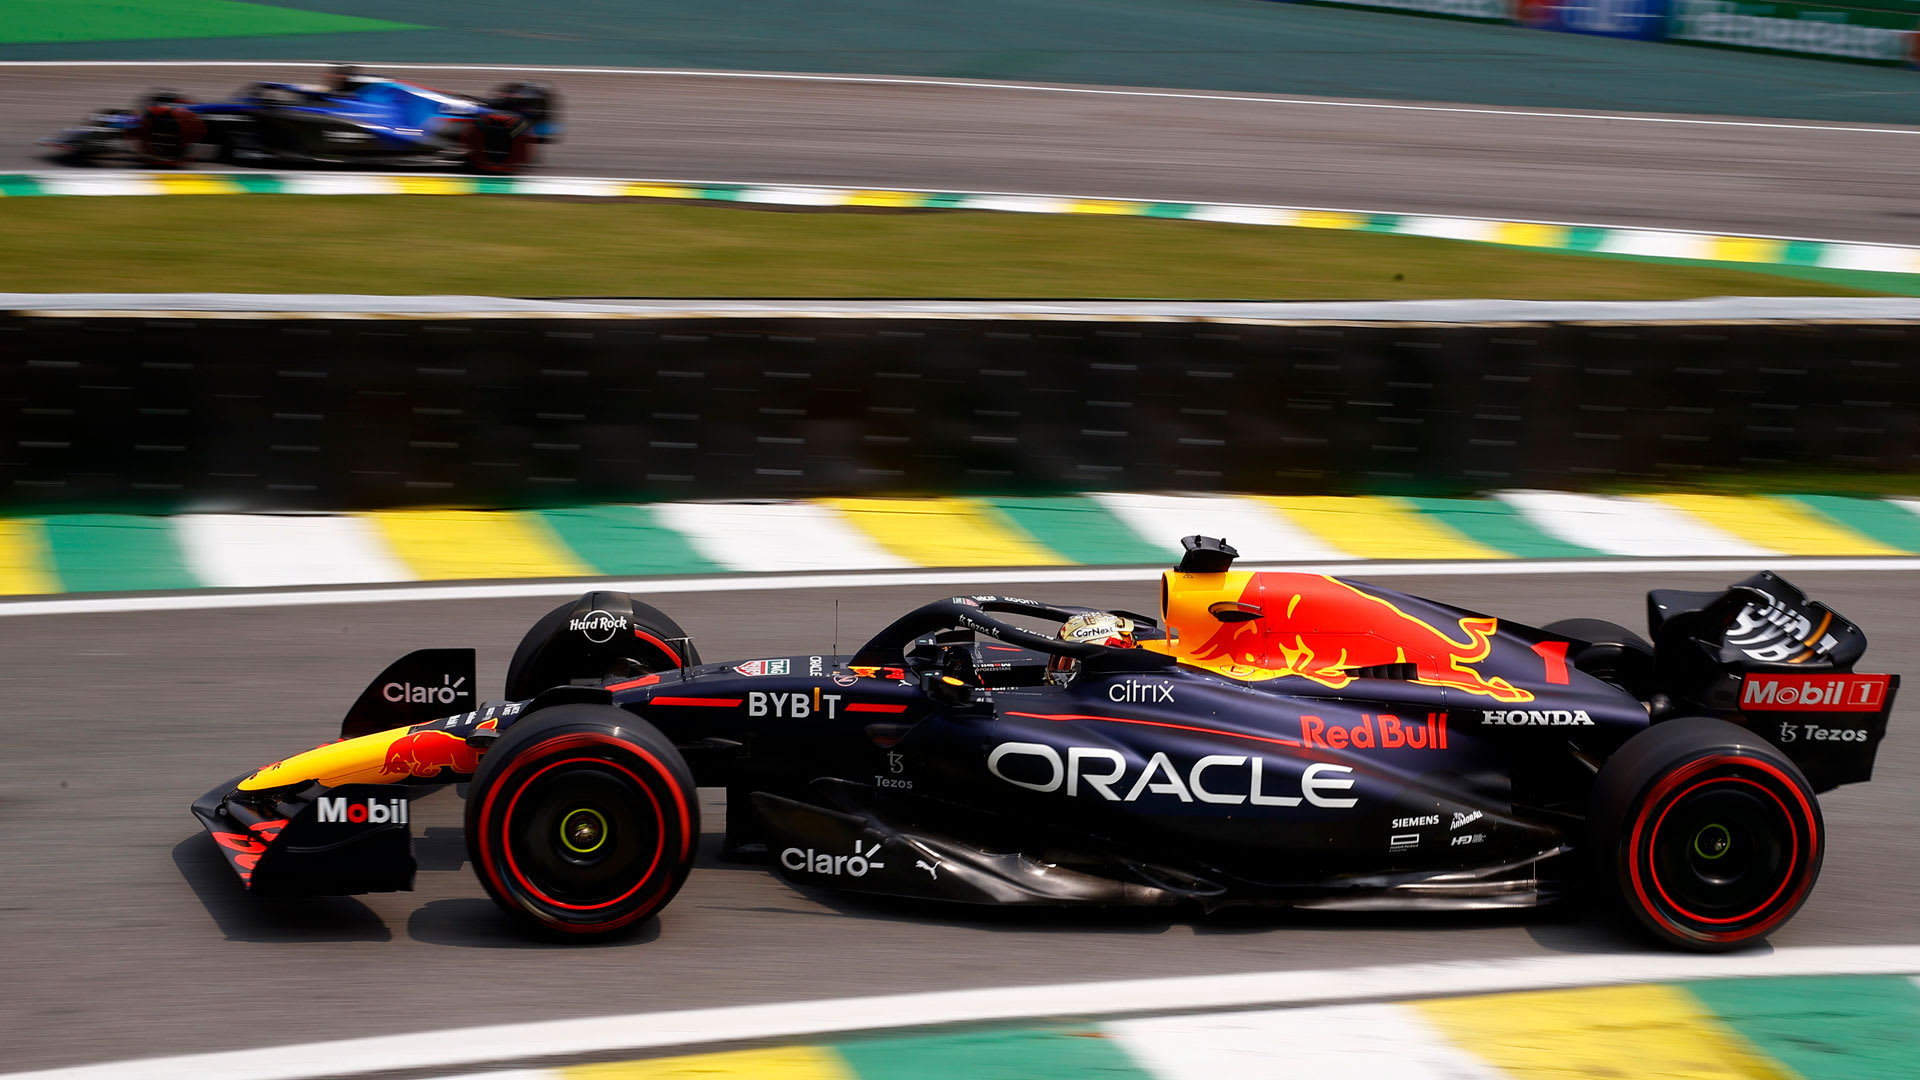 LIVE COVERAGE: Follow all the action from second practice in Brazil - Formula 1